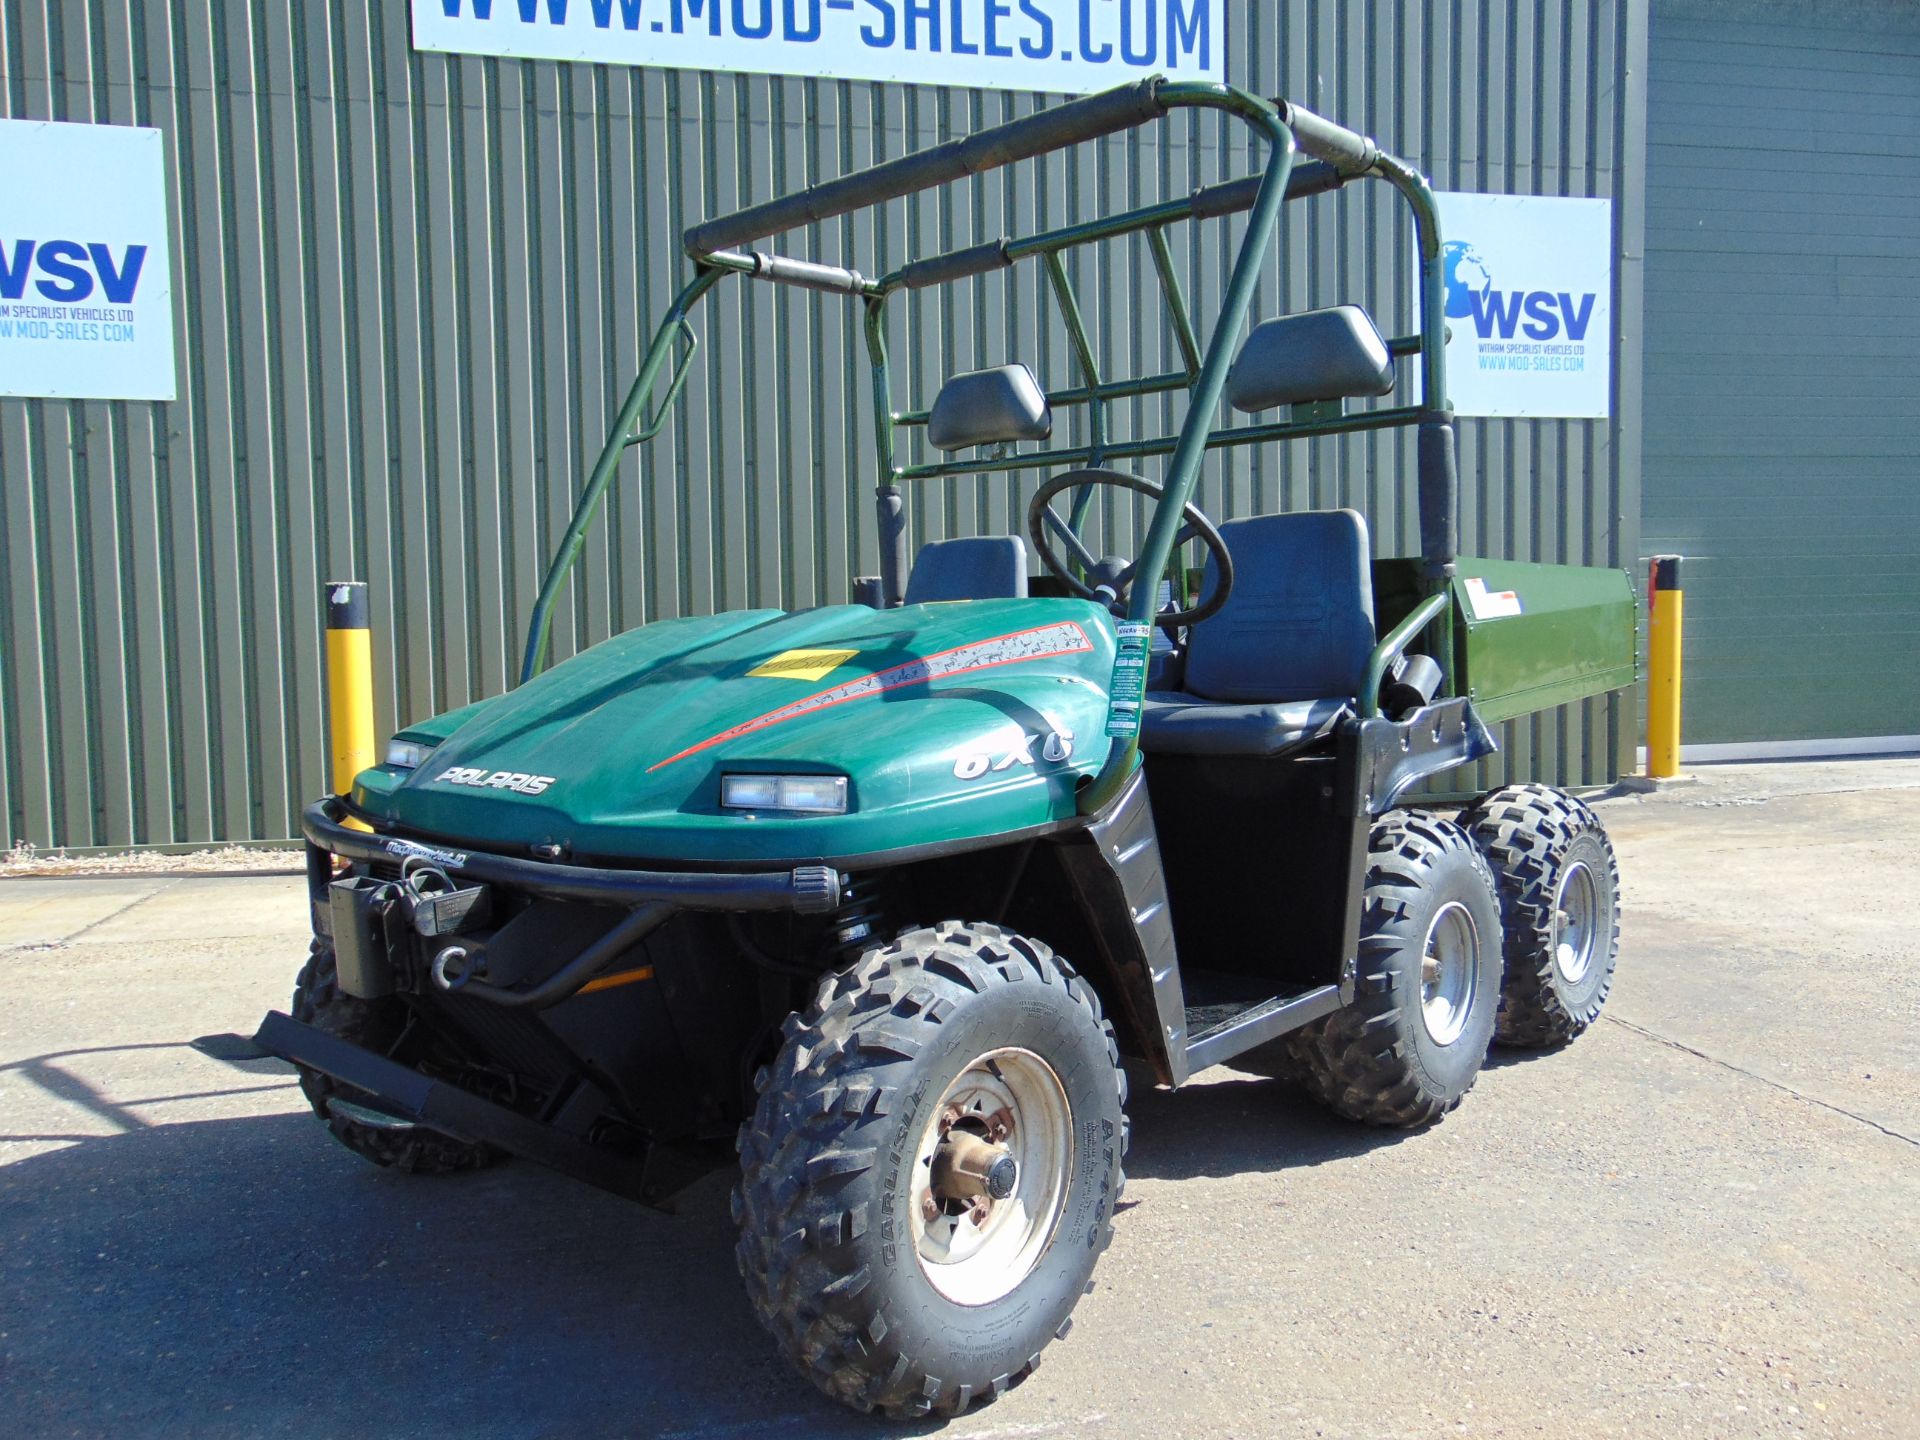 Polaris 6x6 Ranger Utility Vehicle Only 226 Hours! From National Grid.